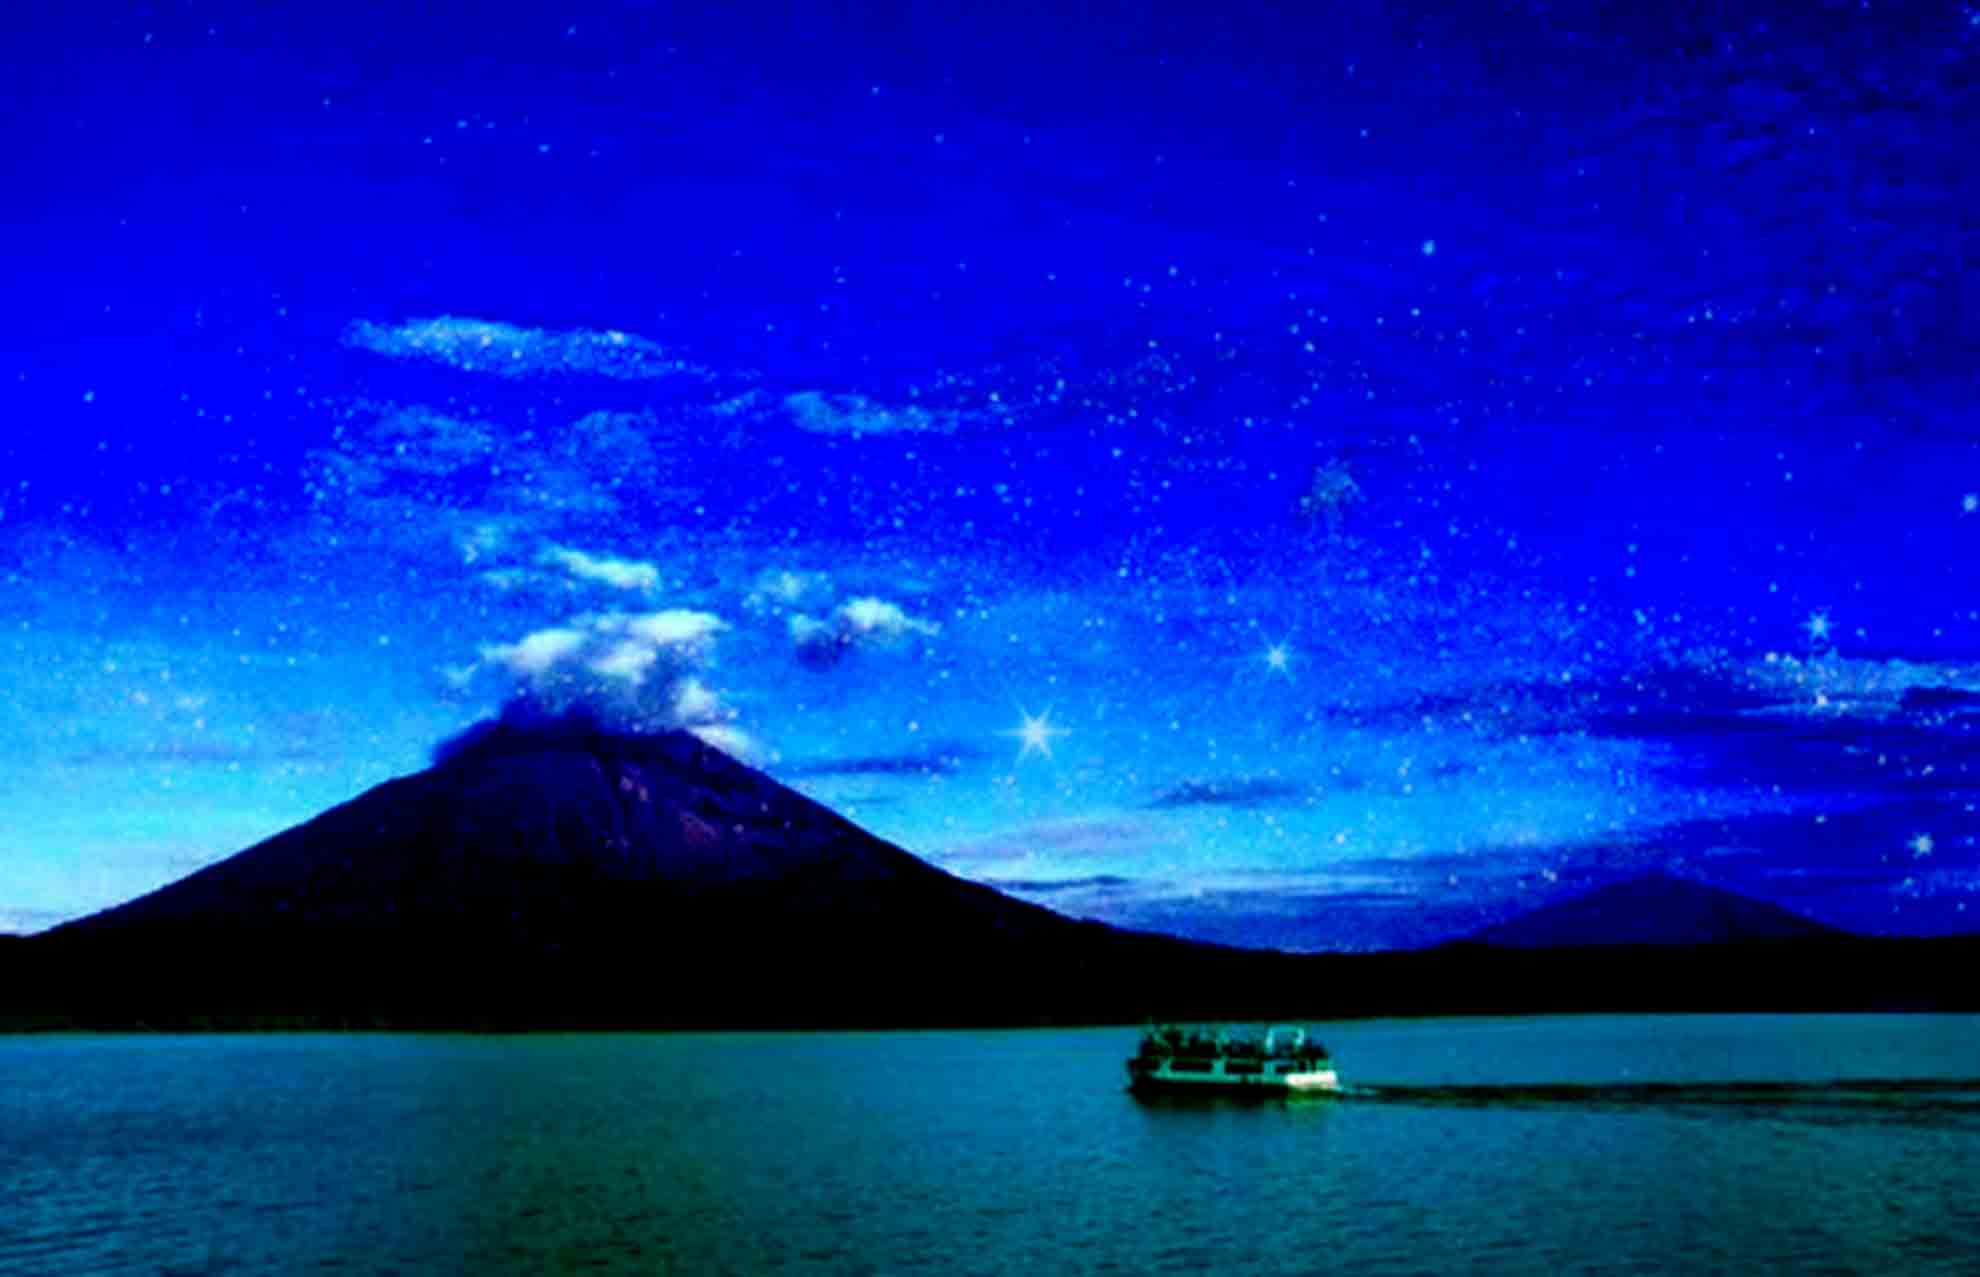 A volcanic cone sitting in a lake, evening sky, and a ferry boat